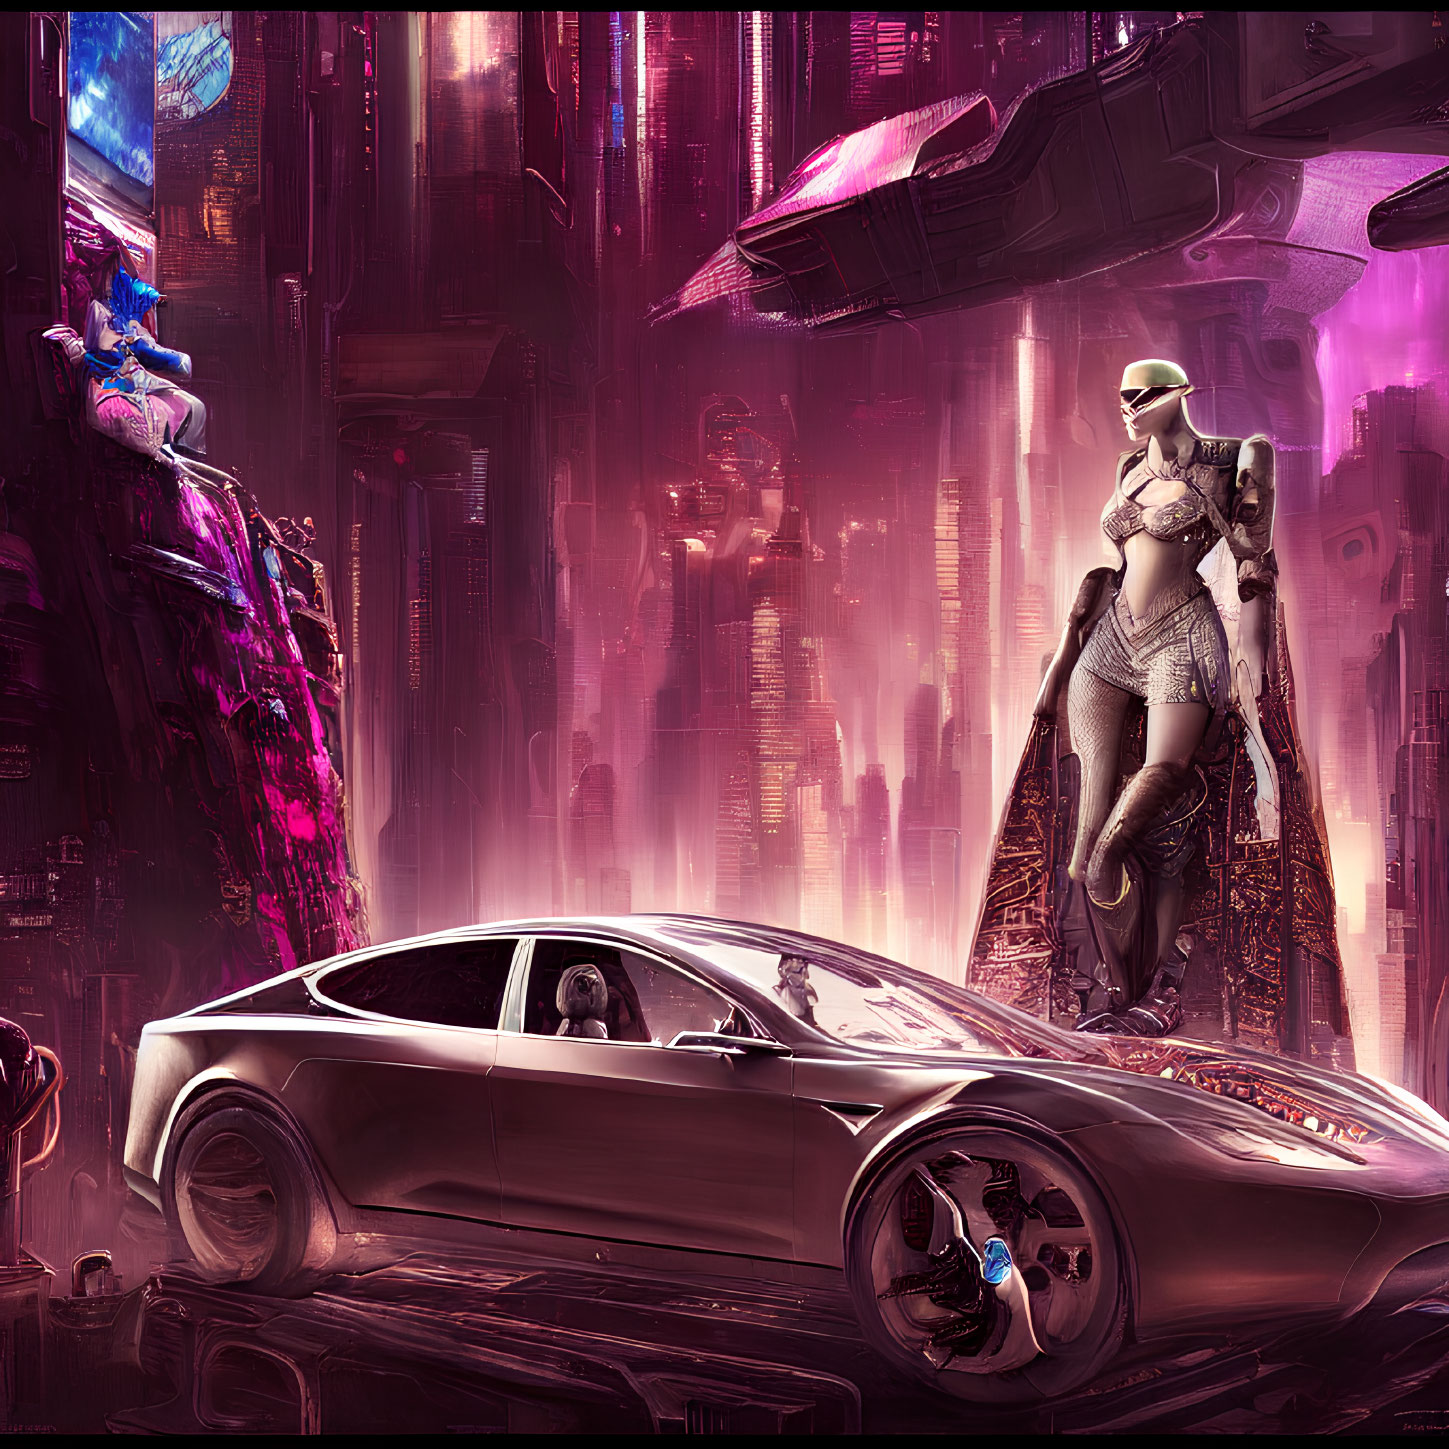 Futuristic cityscape with neon signs, sleek car, humanoid figure, and blue alien.